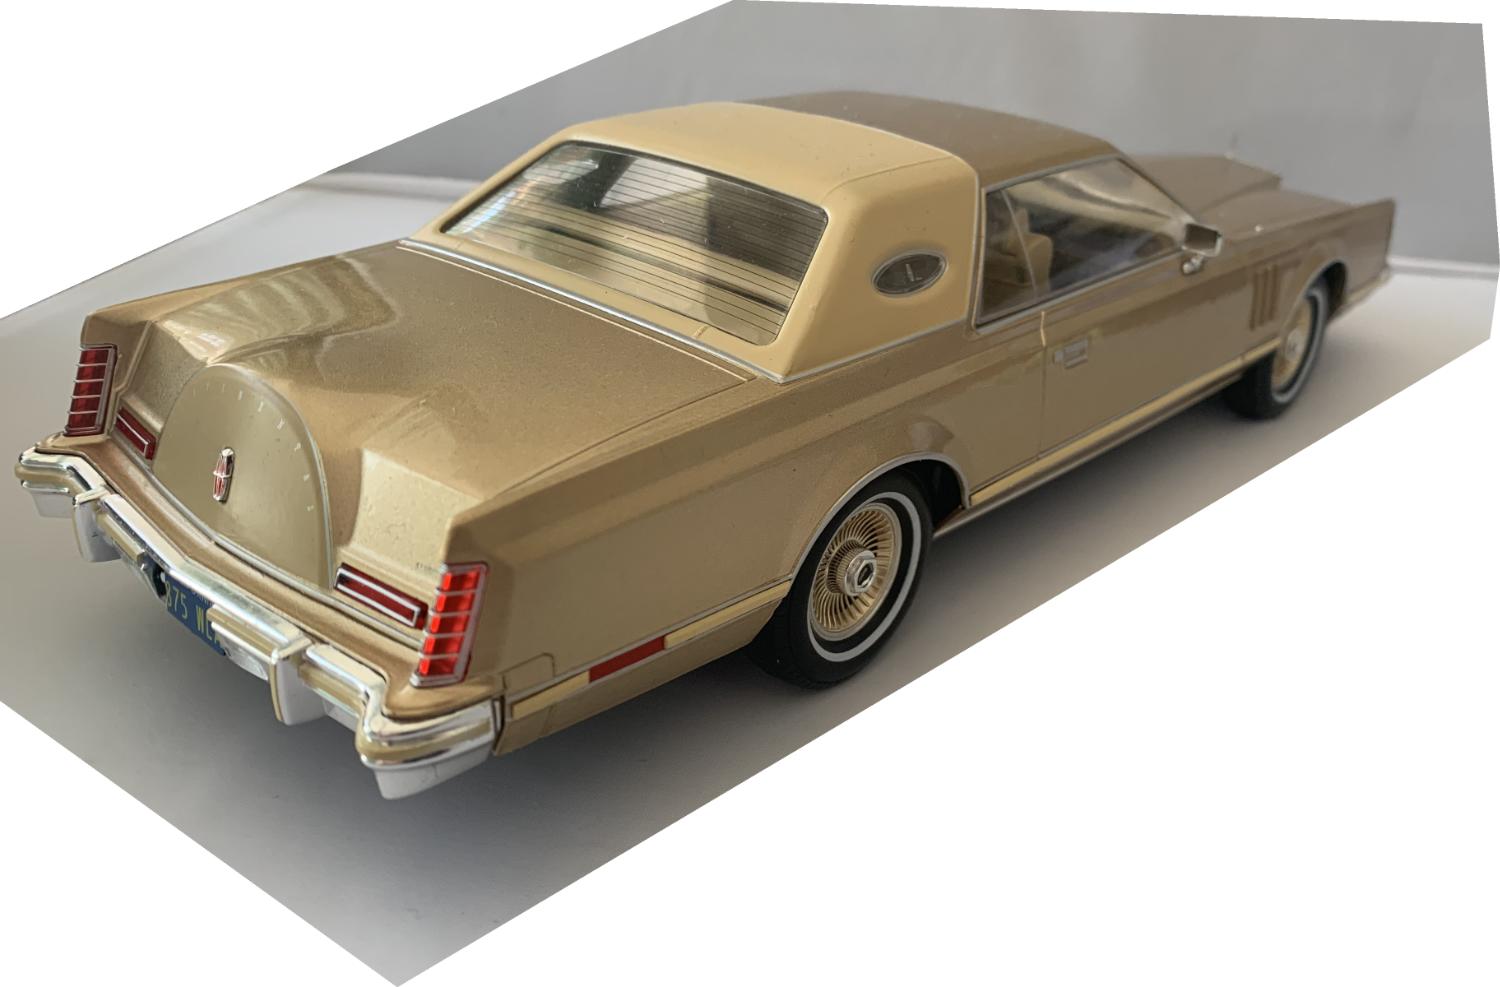 Lincoln Continental mk5 1977 in gold 1:18 scale model from Model Car Group, 18216